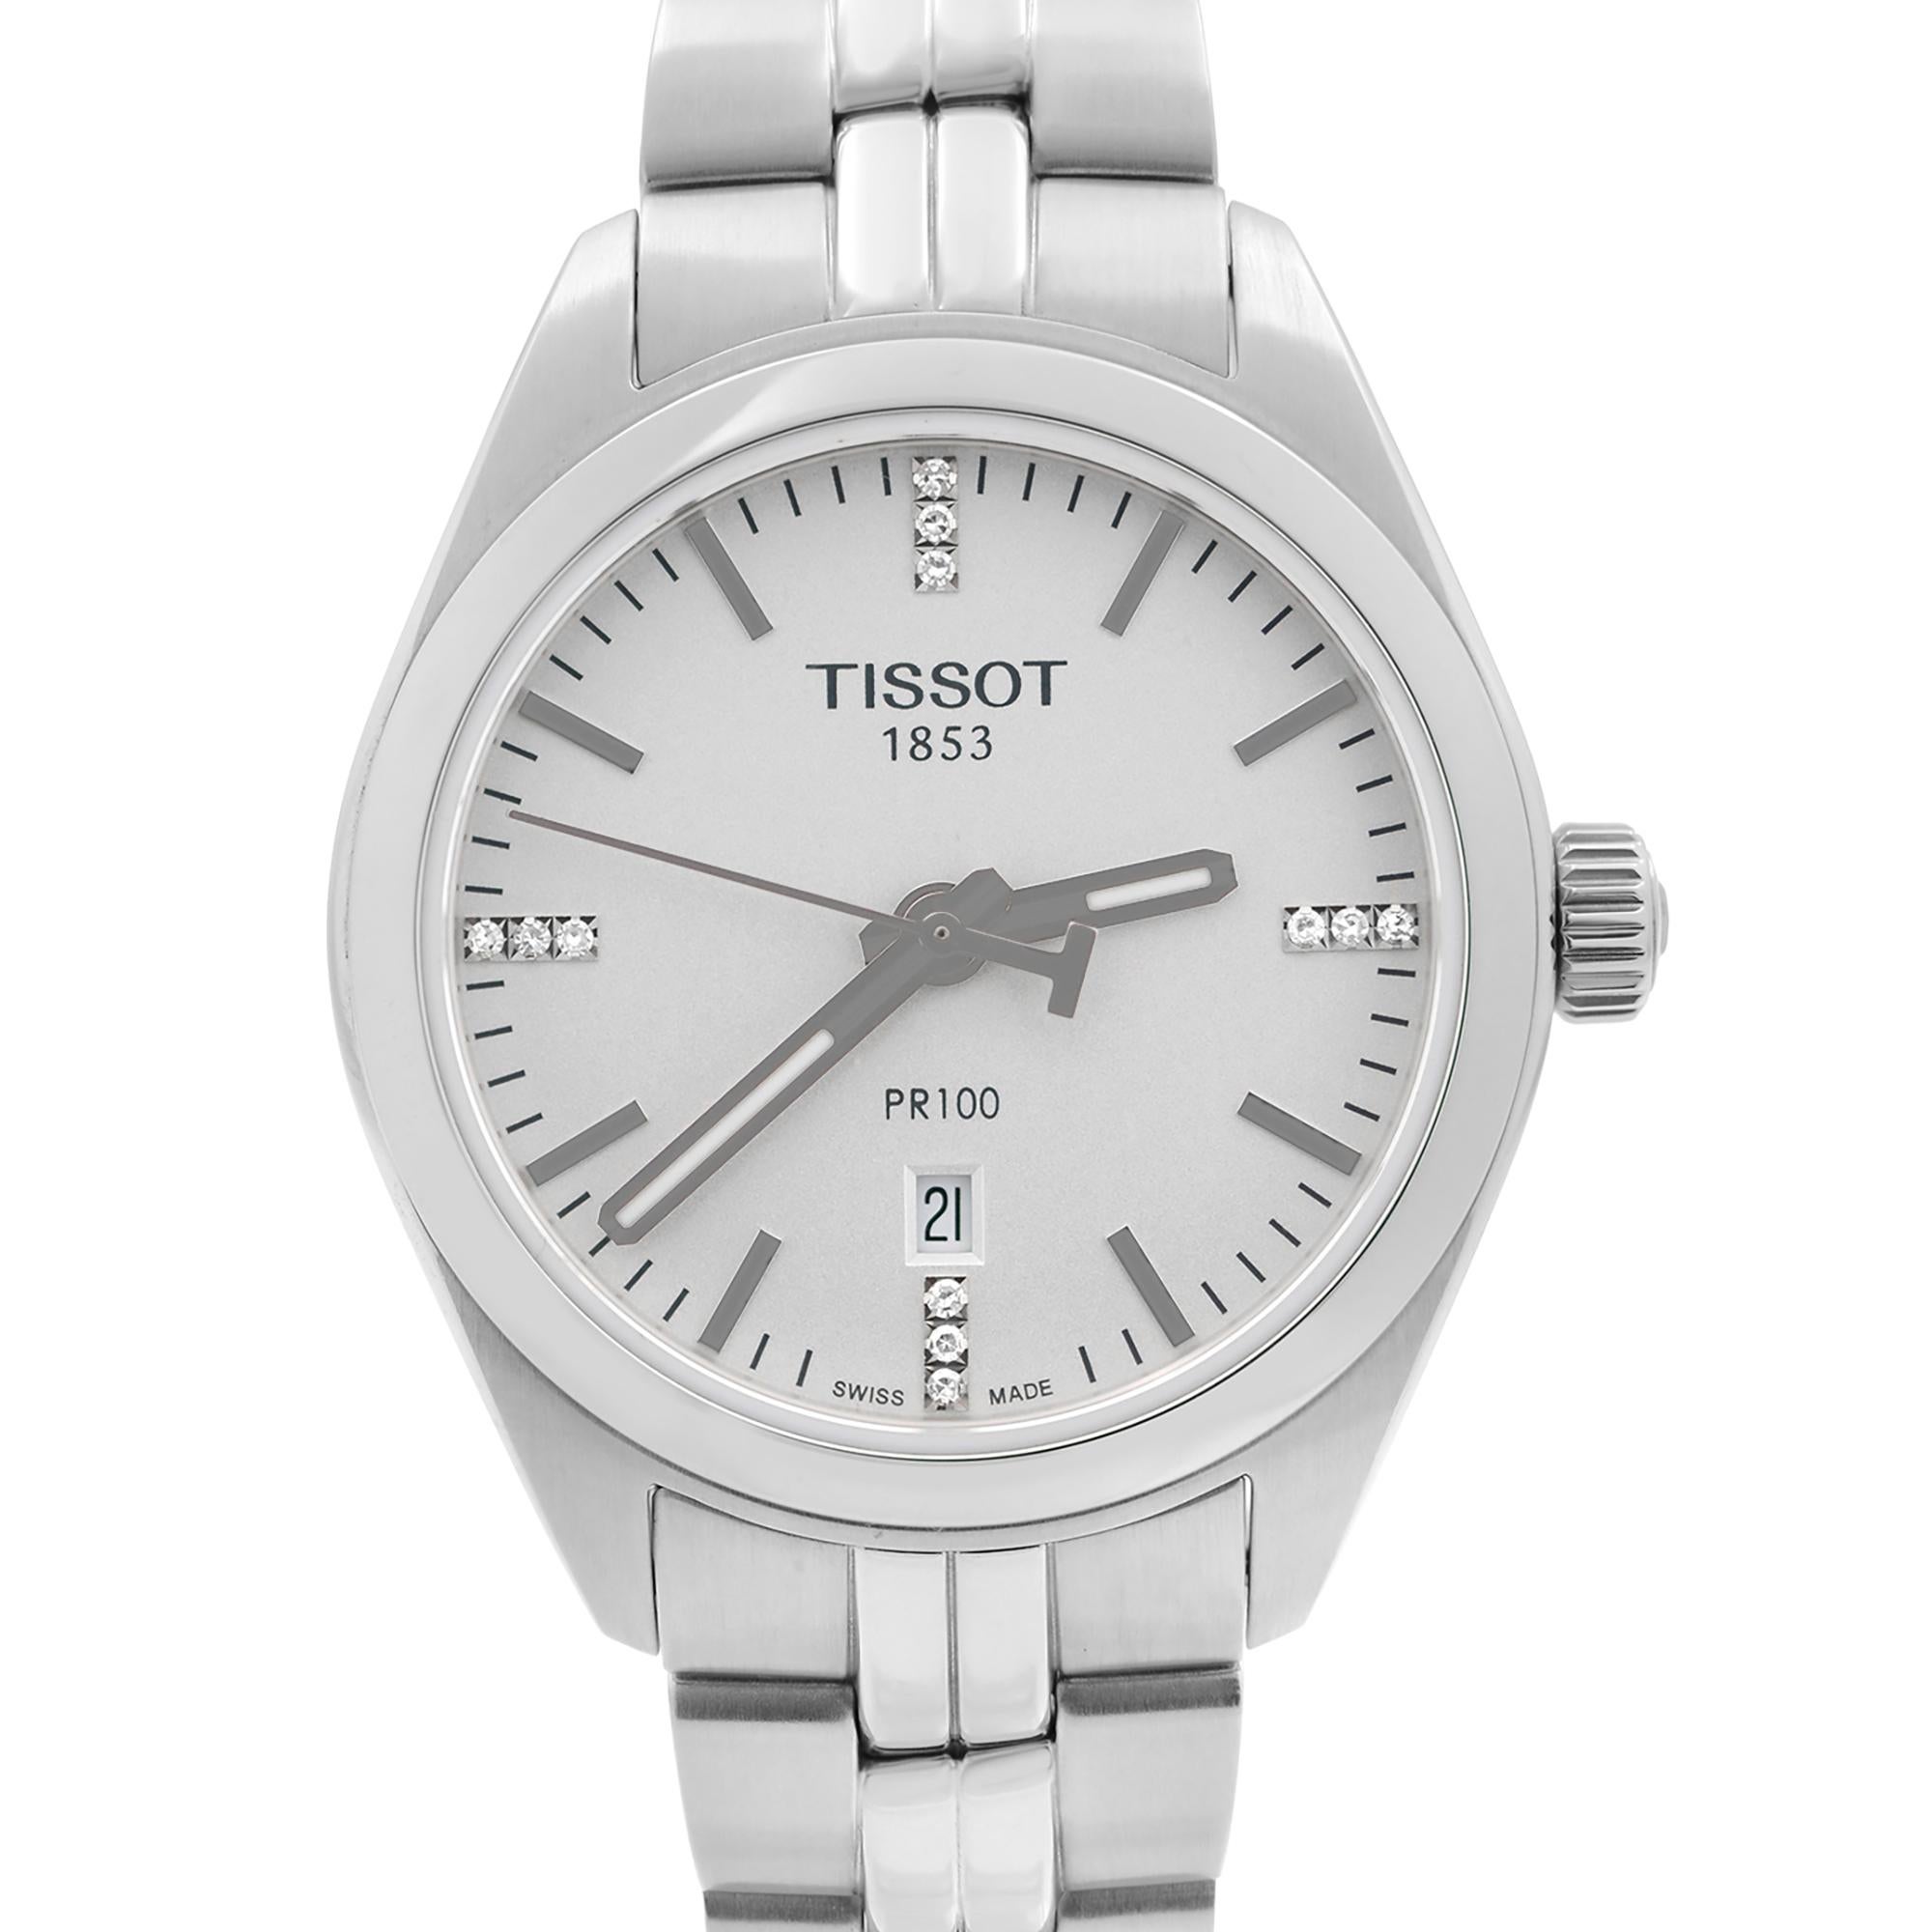 Unworn Tissot PR 100 T-Classic Steel Silver Dial Quartz Ladies Watch T101.210.11.036.00. This Timepiece is Powered Has Stainless Steel Case and Bracelet, Fix Smooth Stainless Steel Bezel, Silver Dial with Luminous Silver-Tone Hands and Index Hour